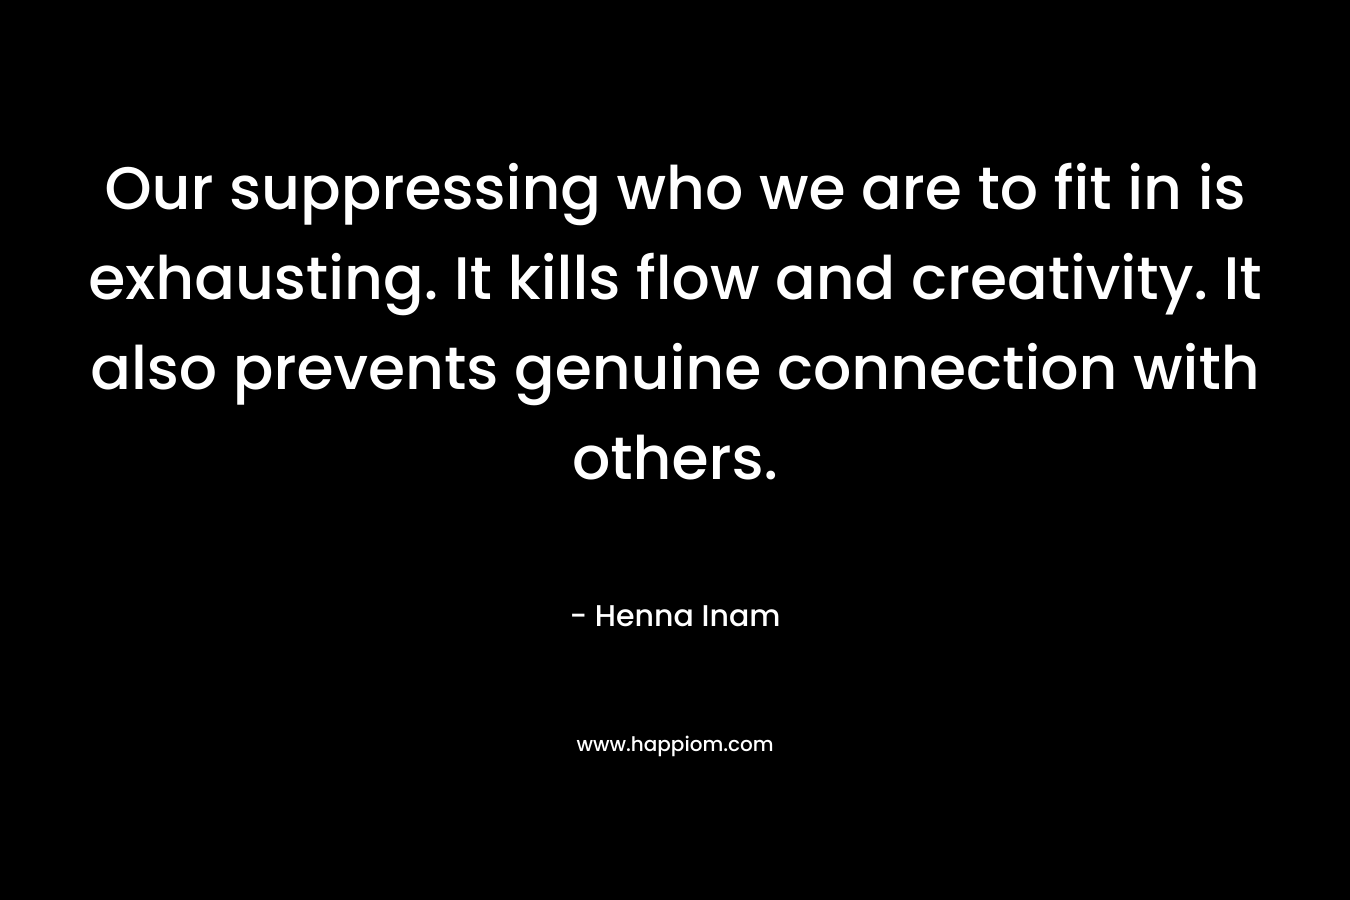 Our suppressing who we are to fit in is exhausting. It kills flow and creativity. It also prevents genuine connection with others.